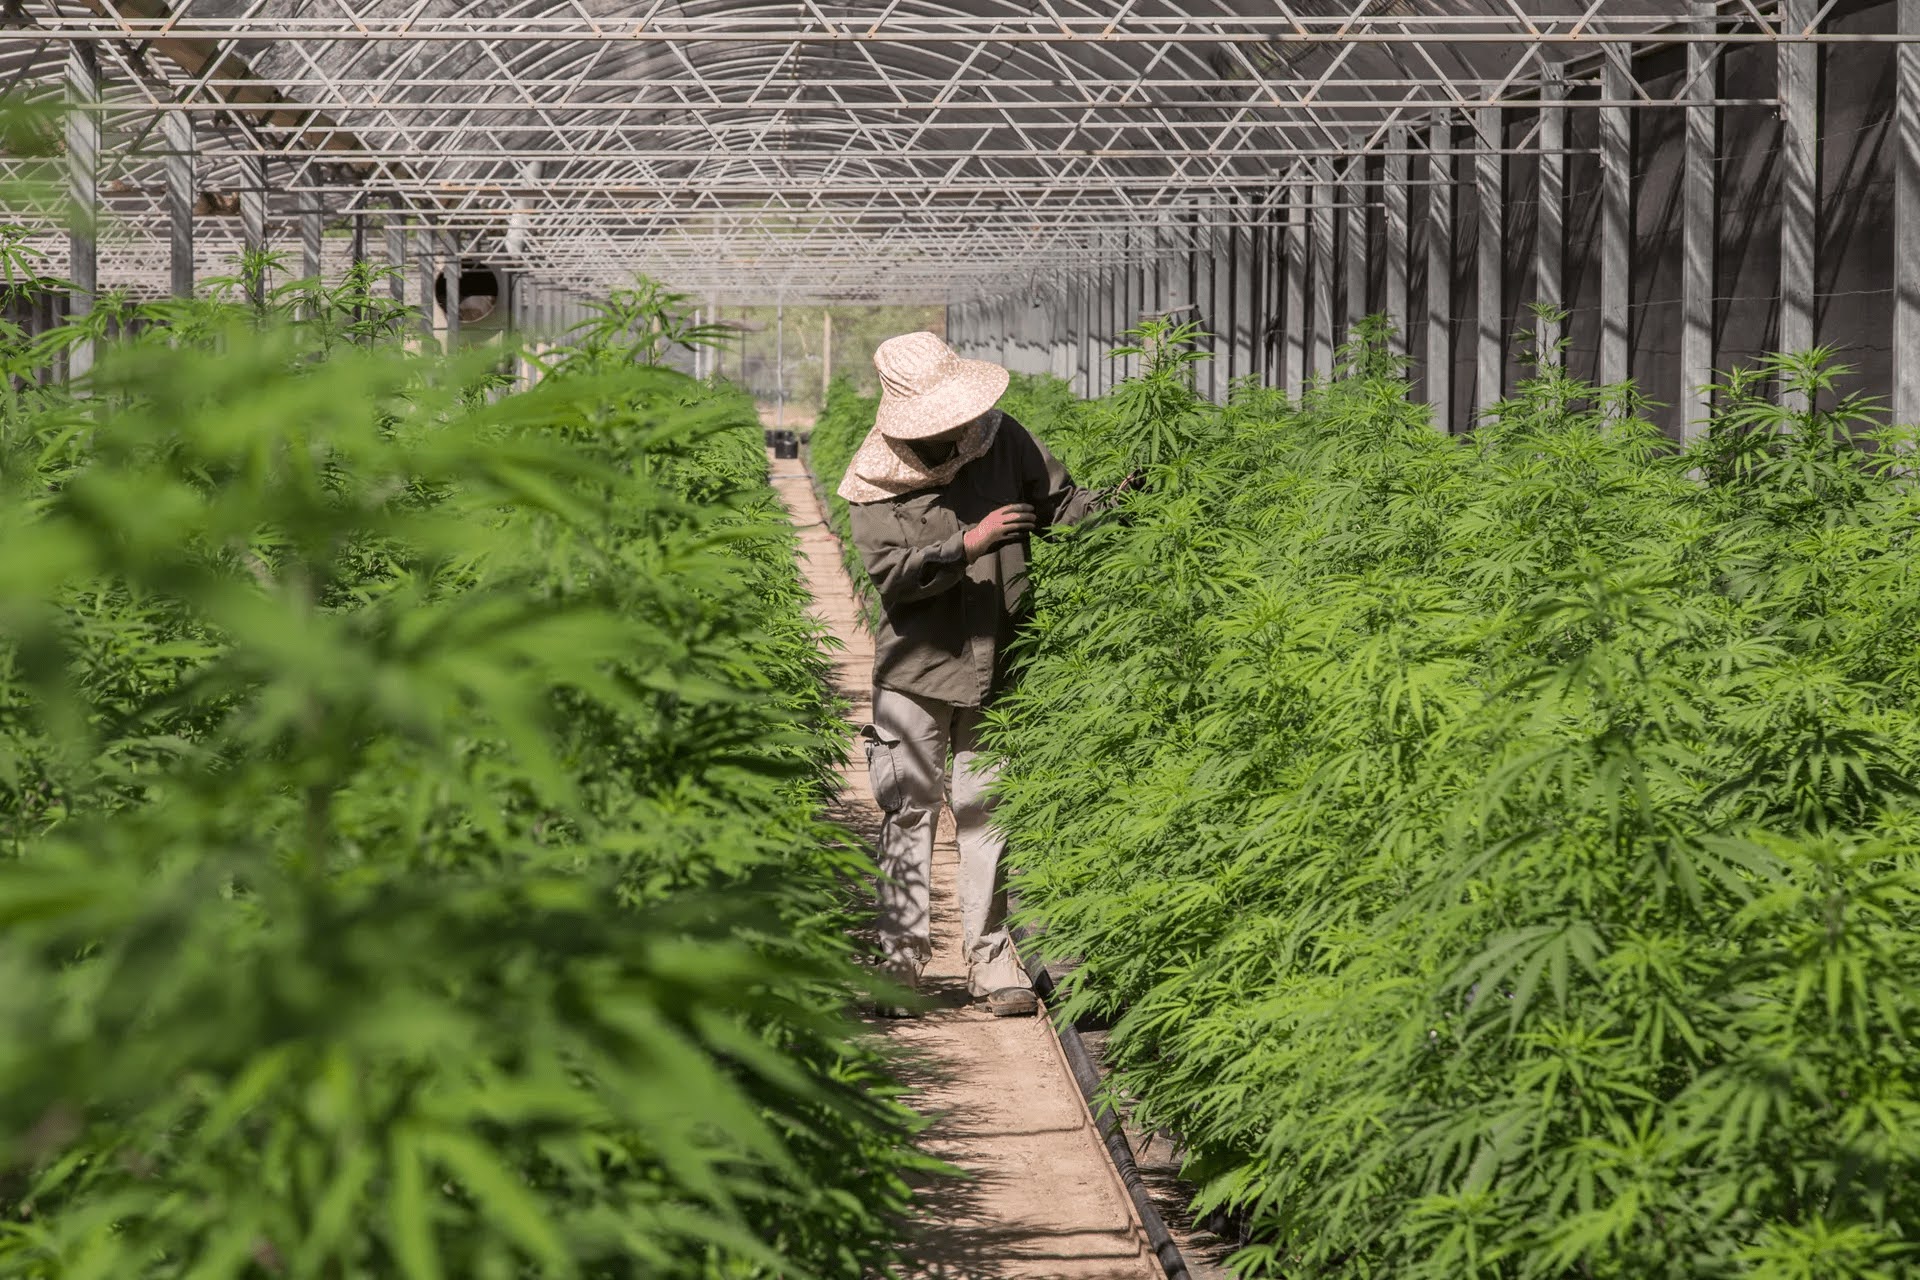 worker among rows of cannabis plants in greenhouse